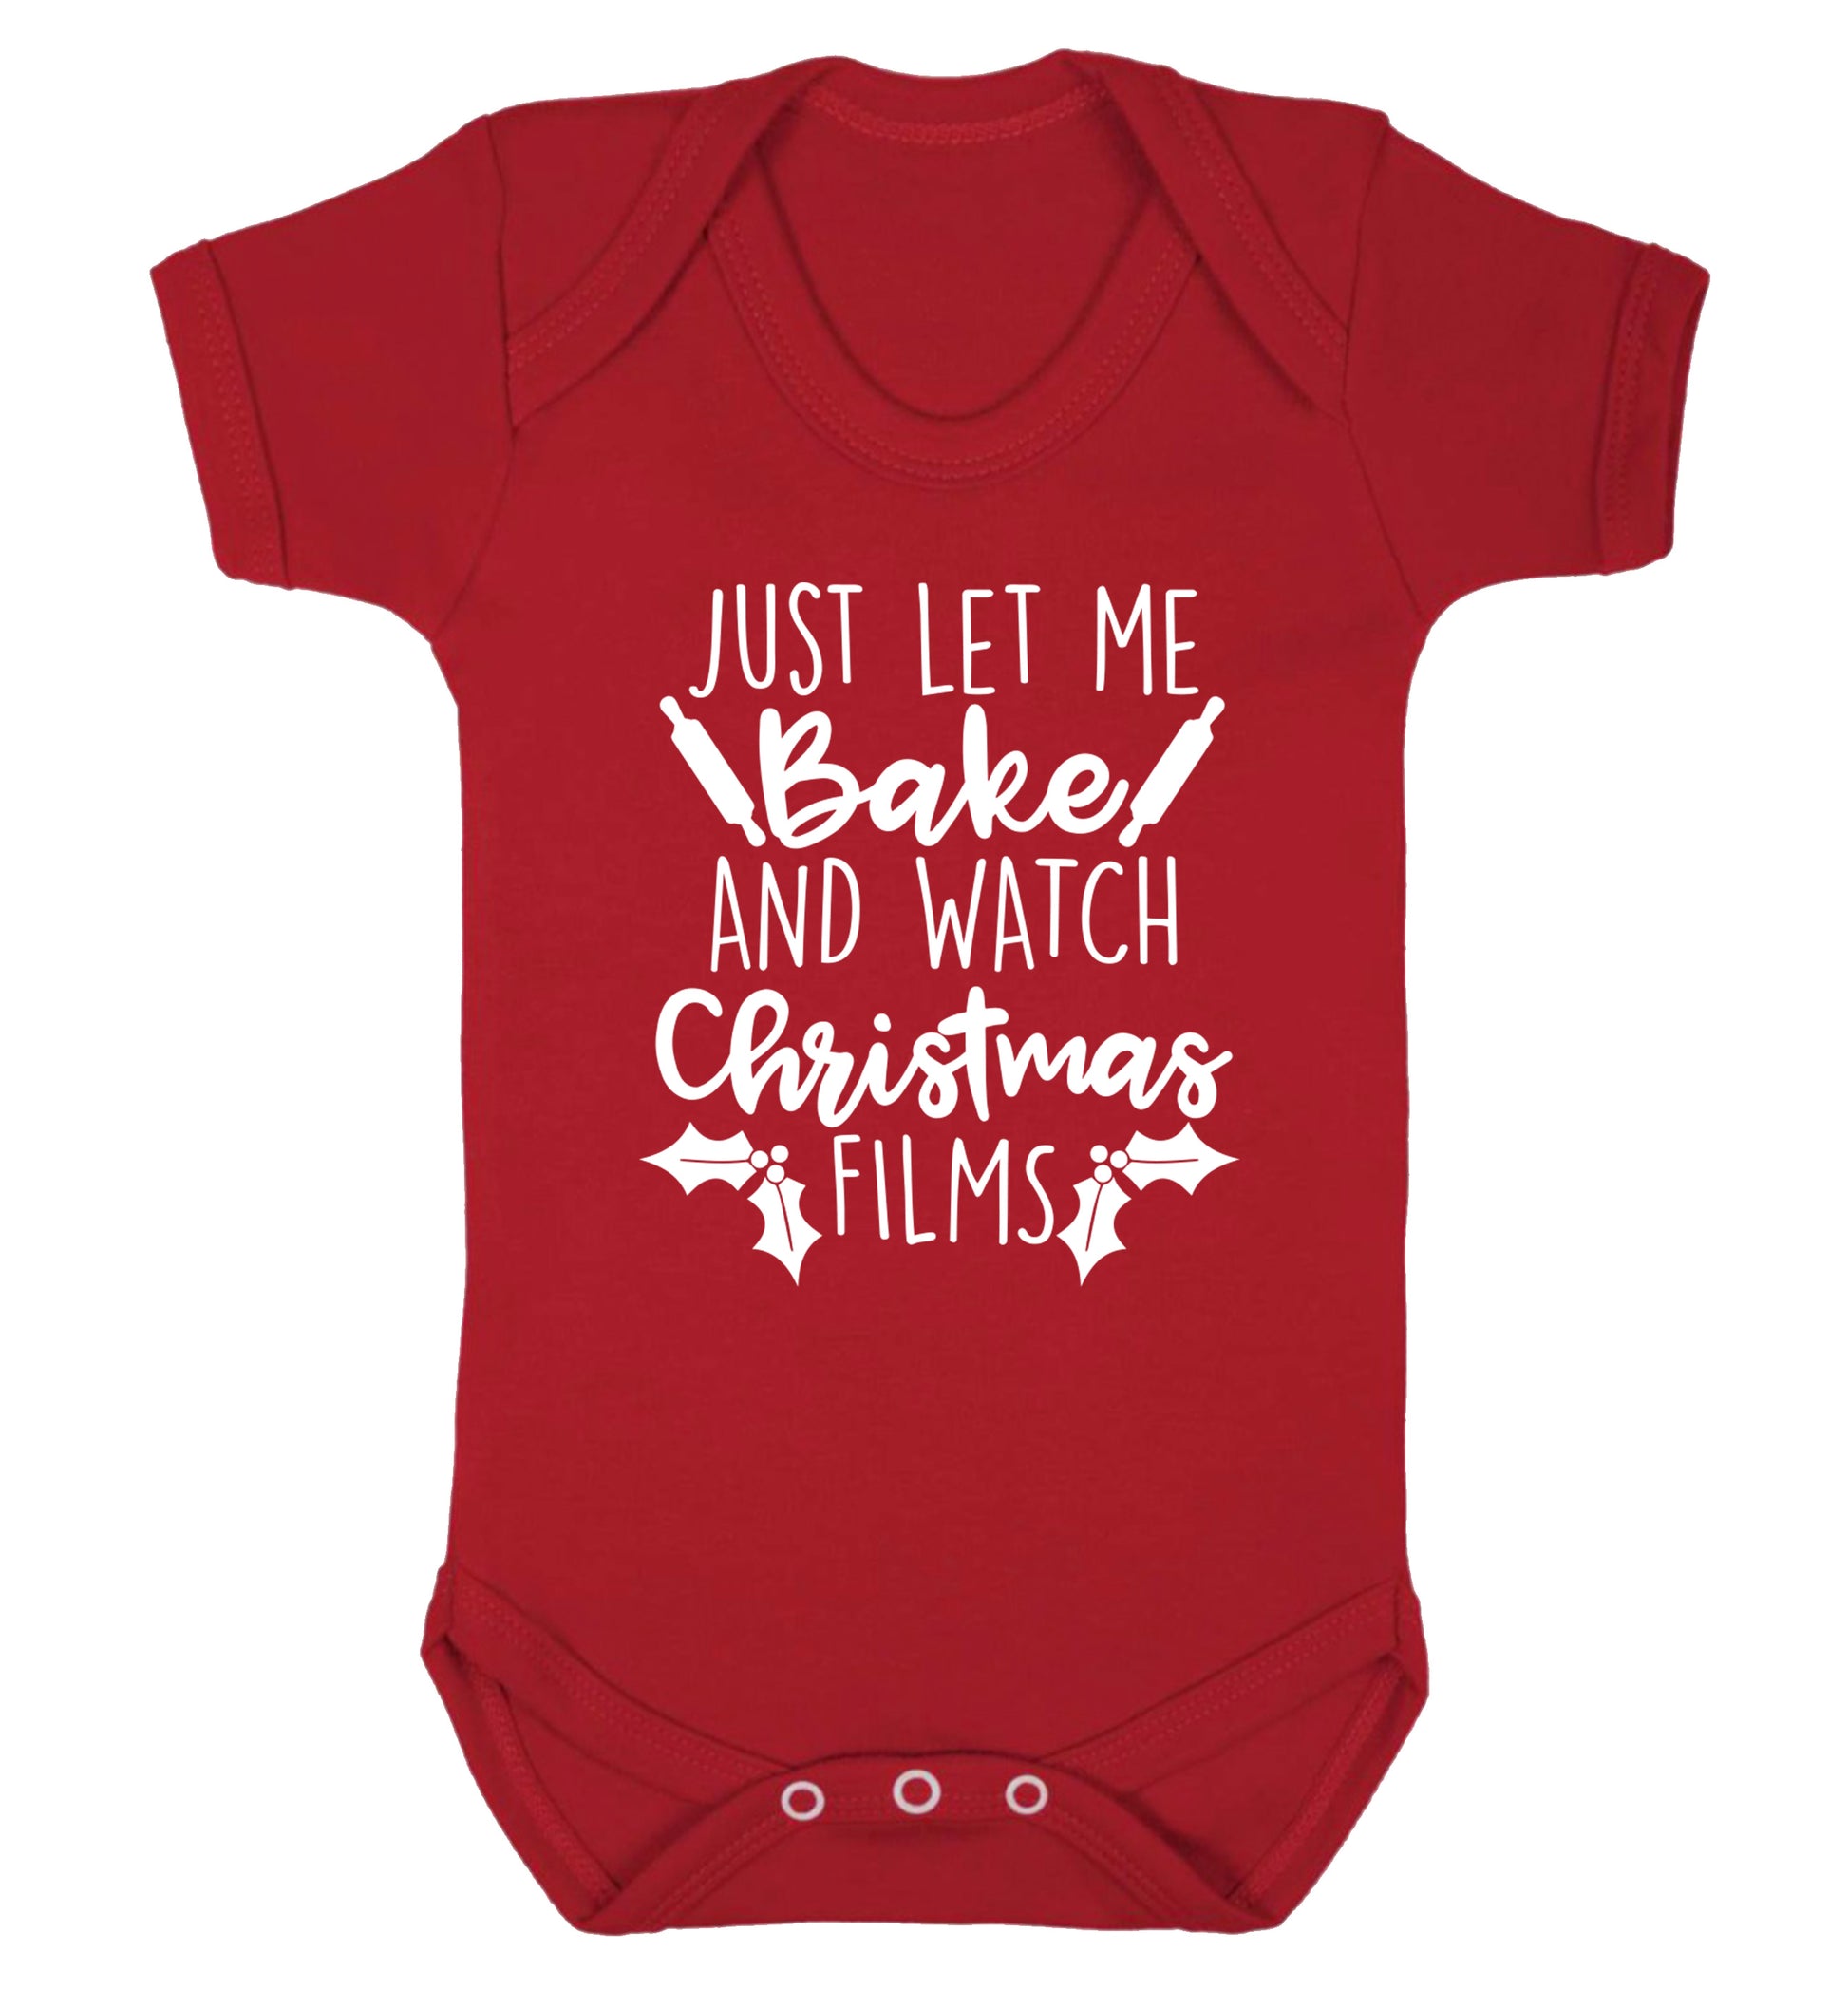 Just let me bake and watch Christmas films Baby Vest red 18-24 months